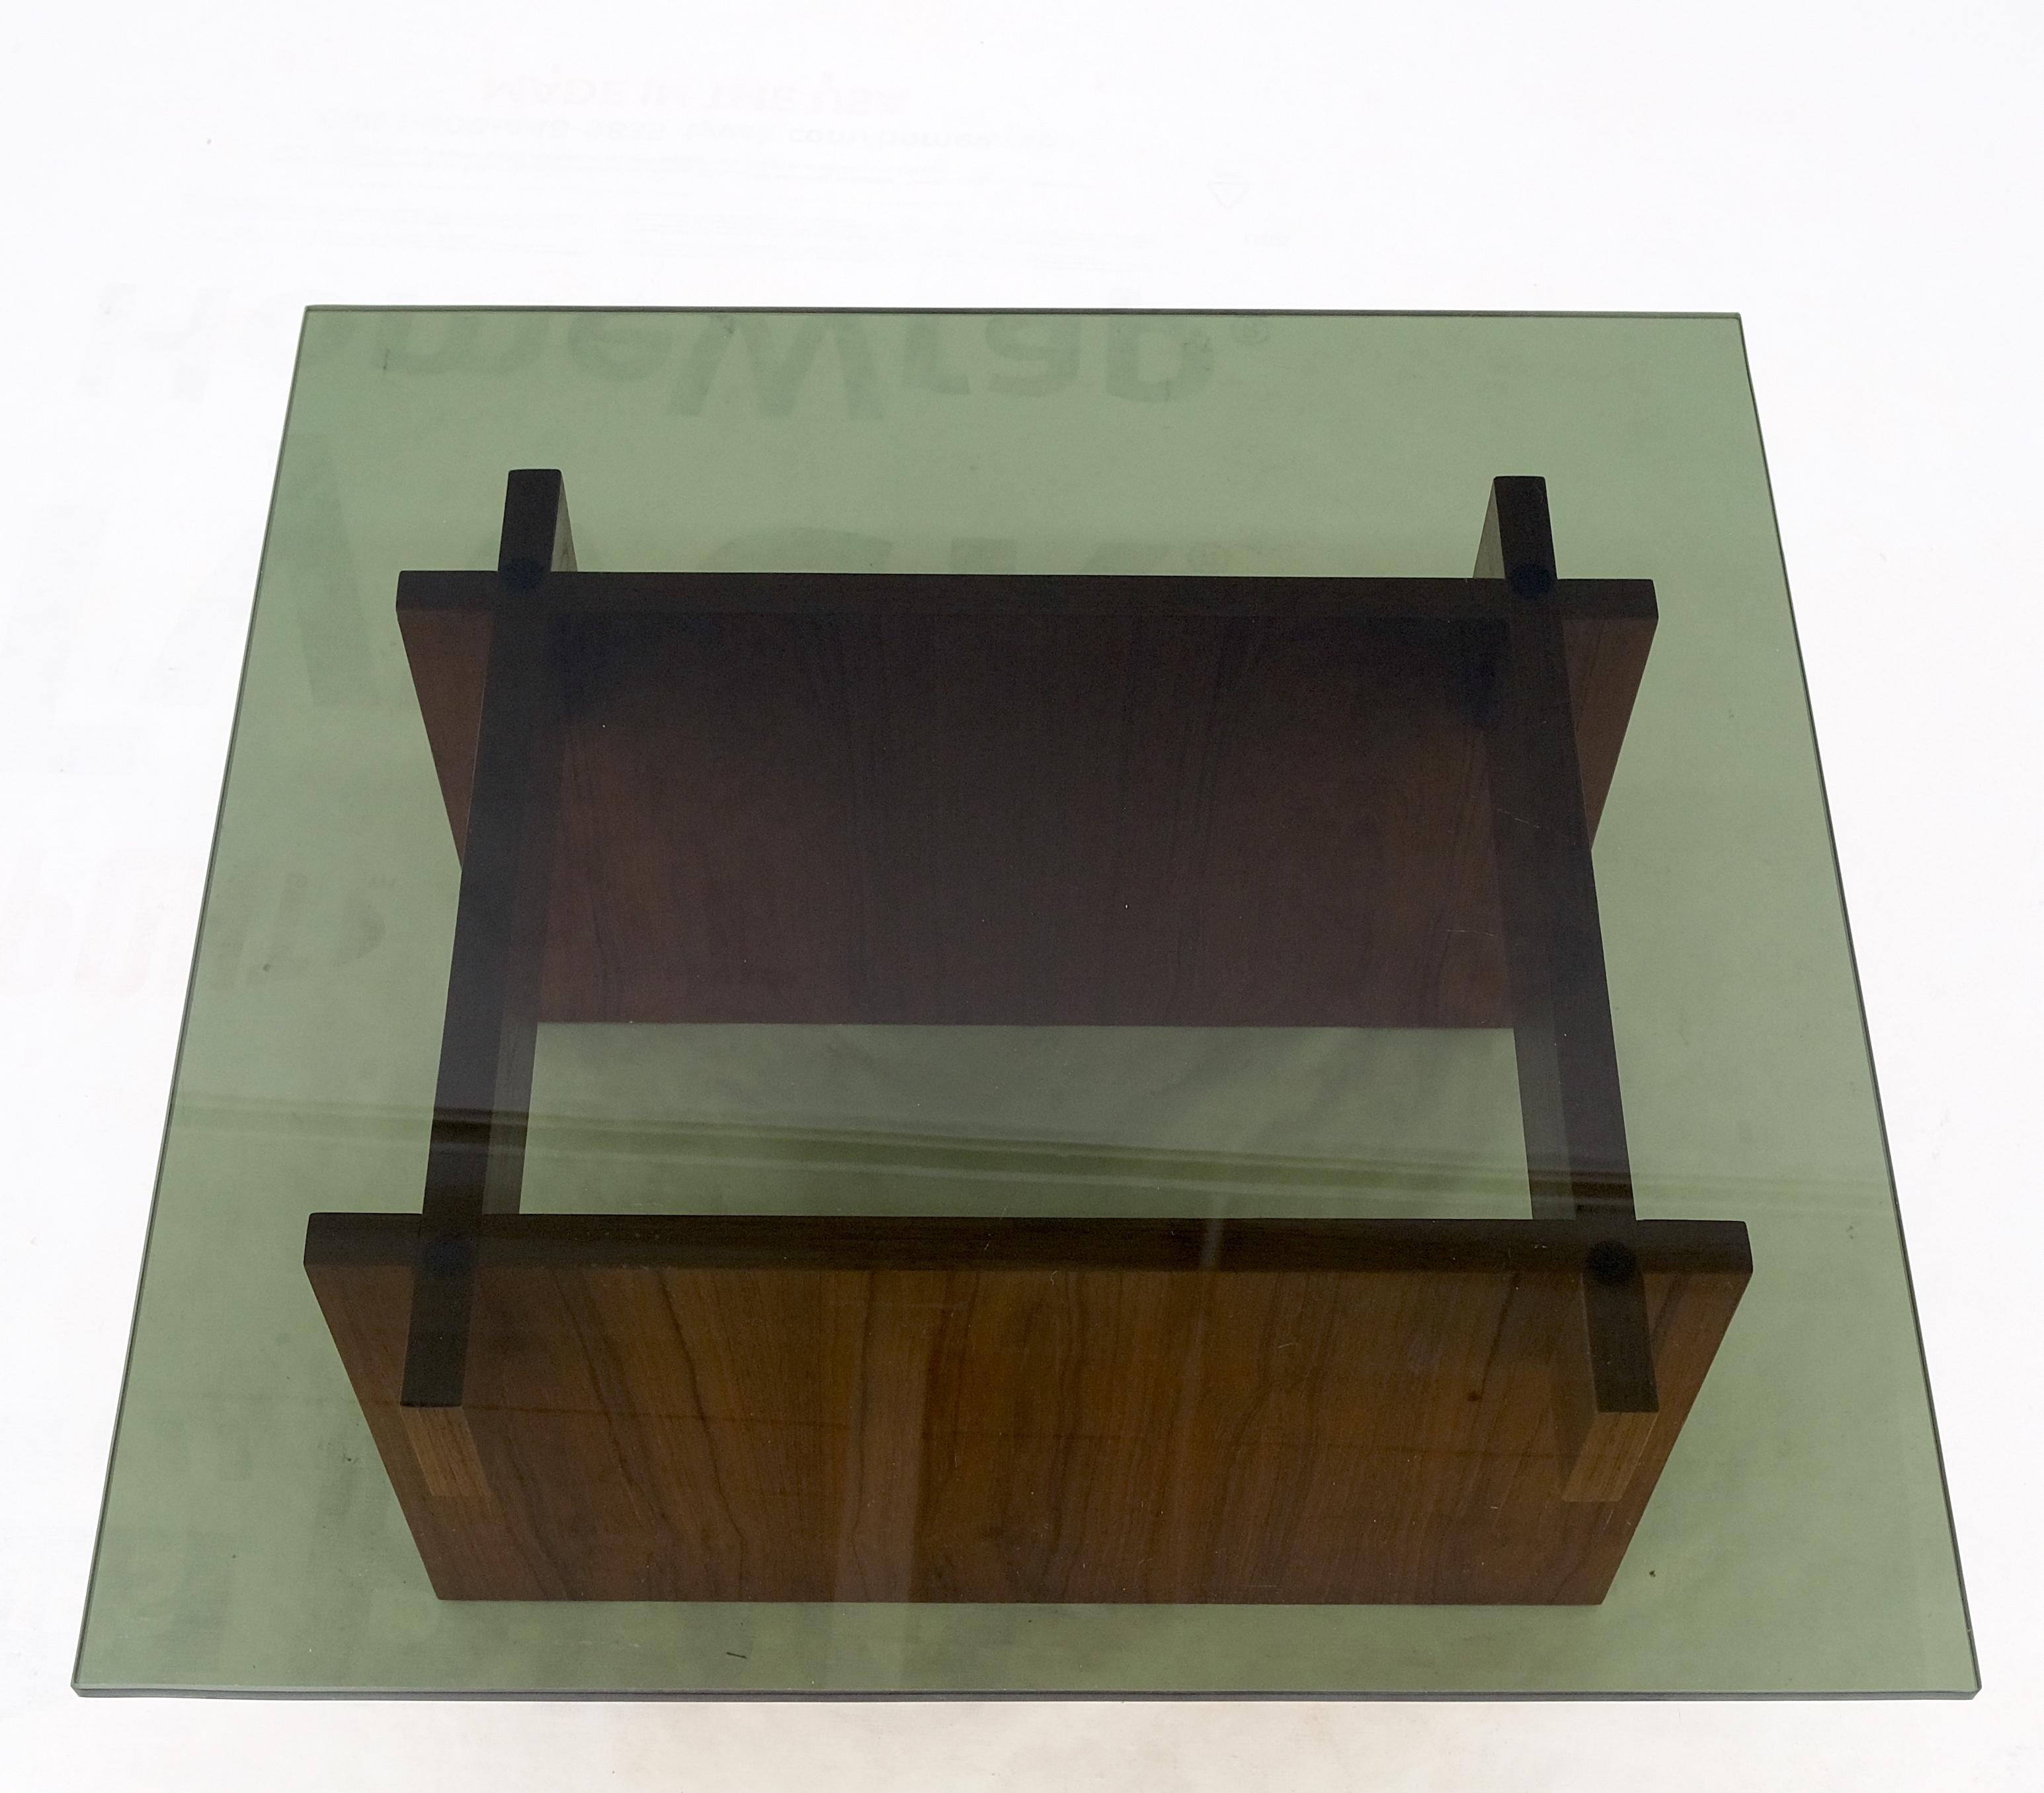 Danish Mid-Century Modern Teak Smoked Glass Square Coffee Table MINT! For Sale 7